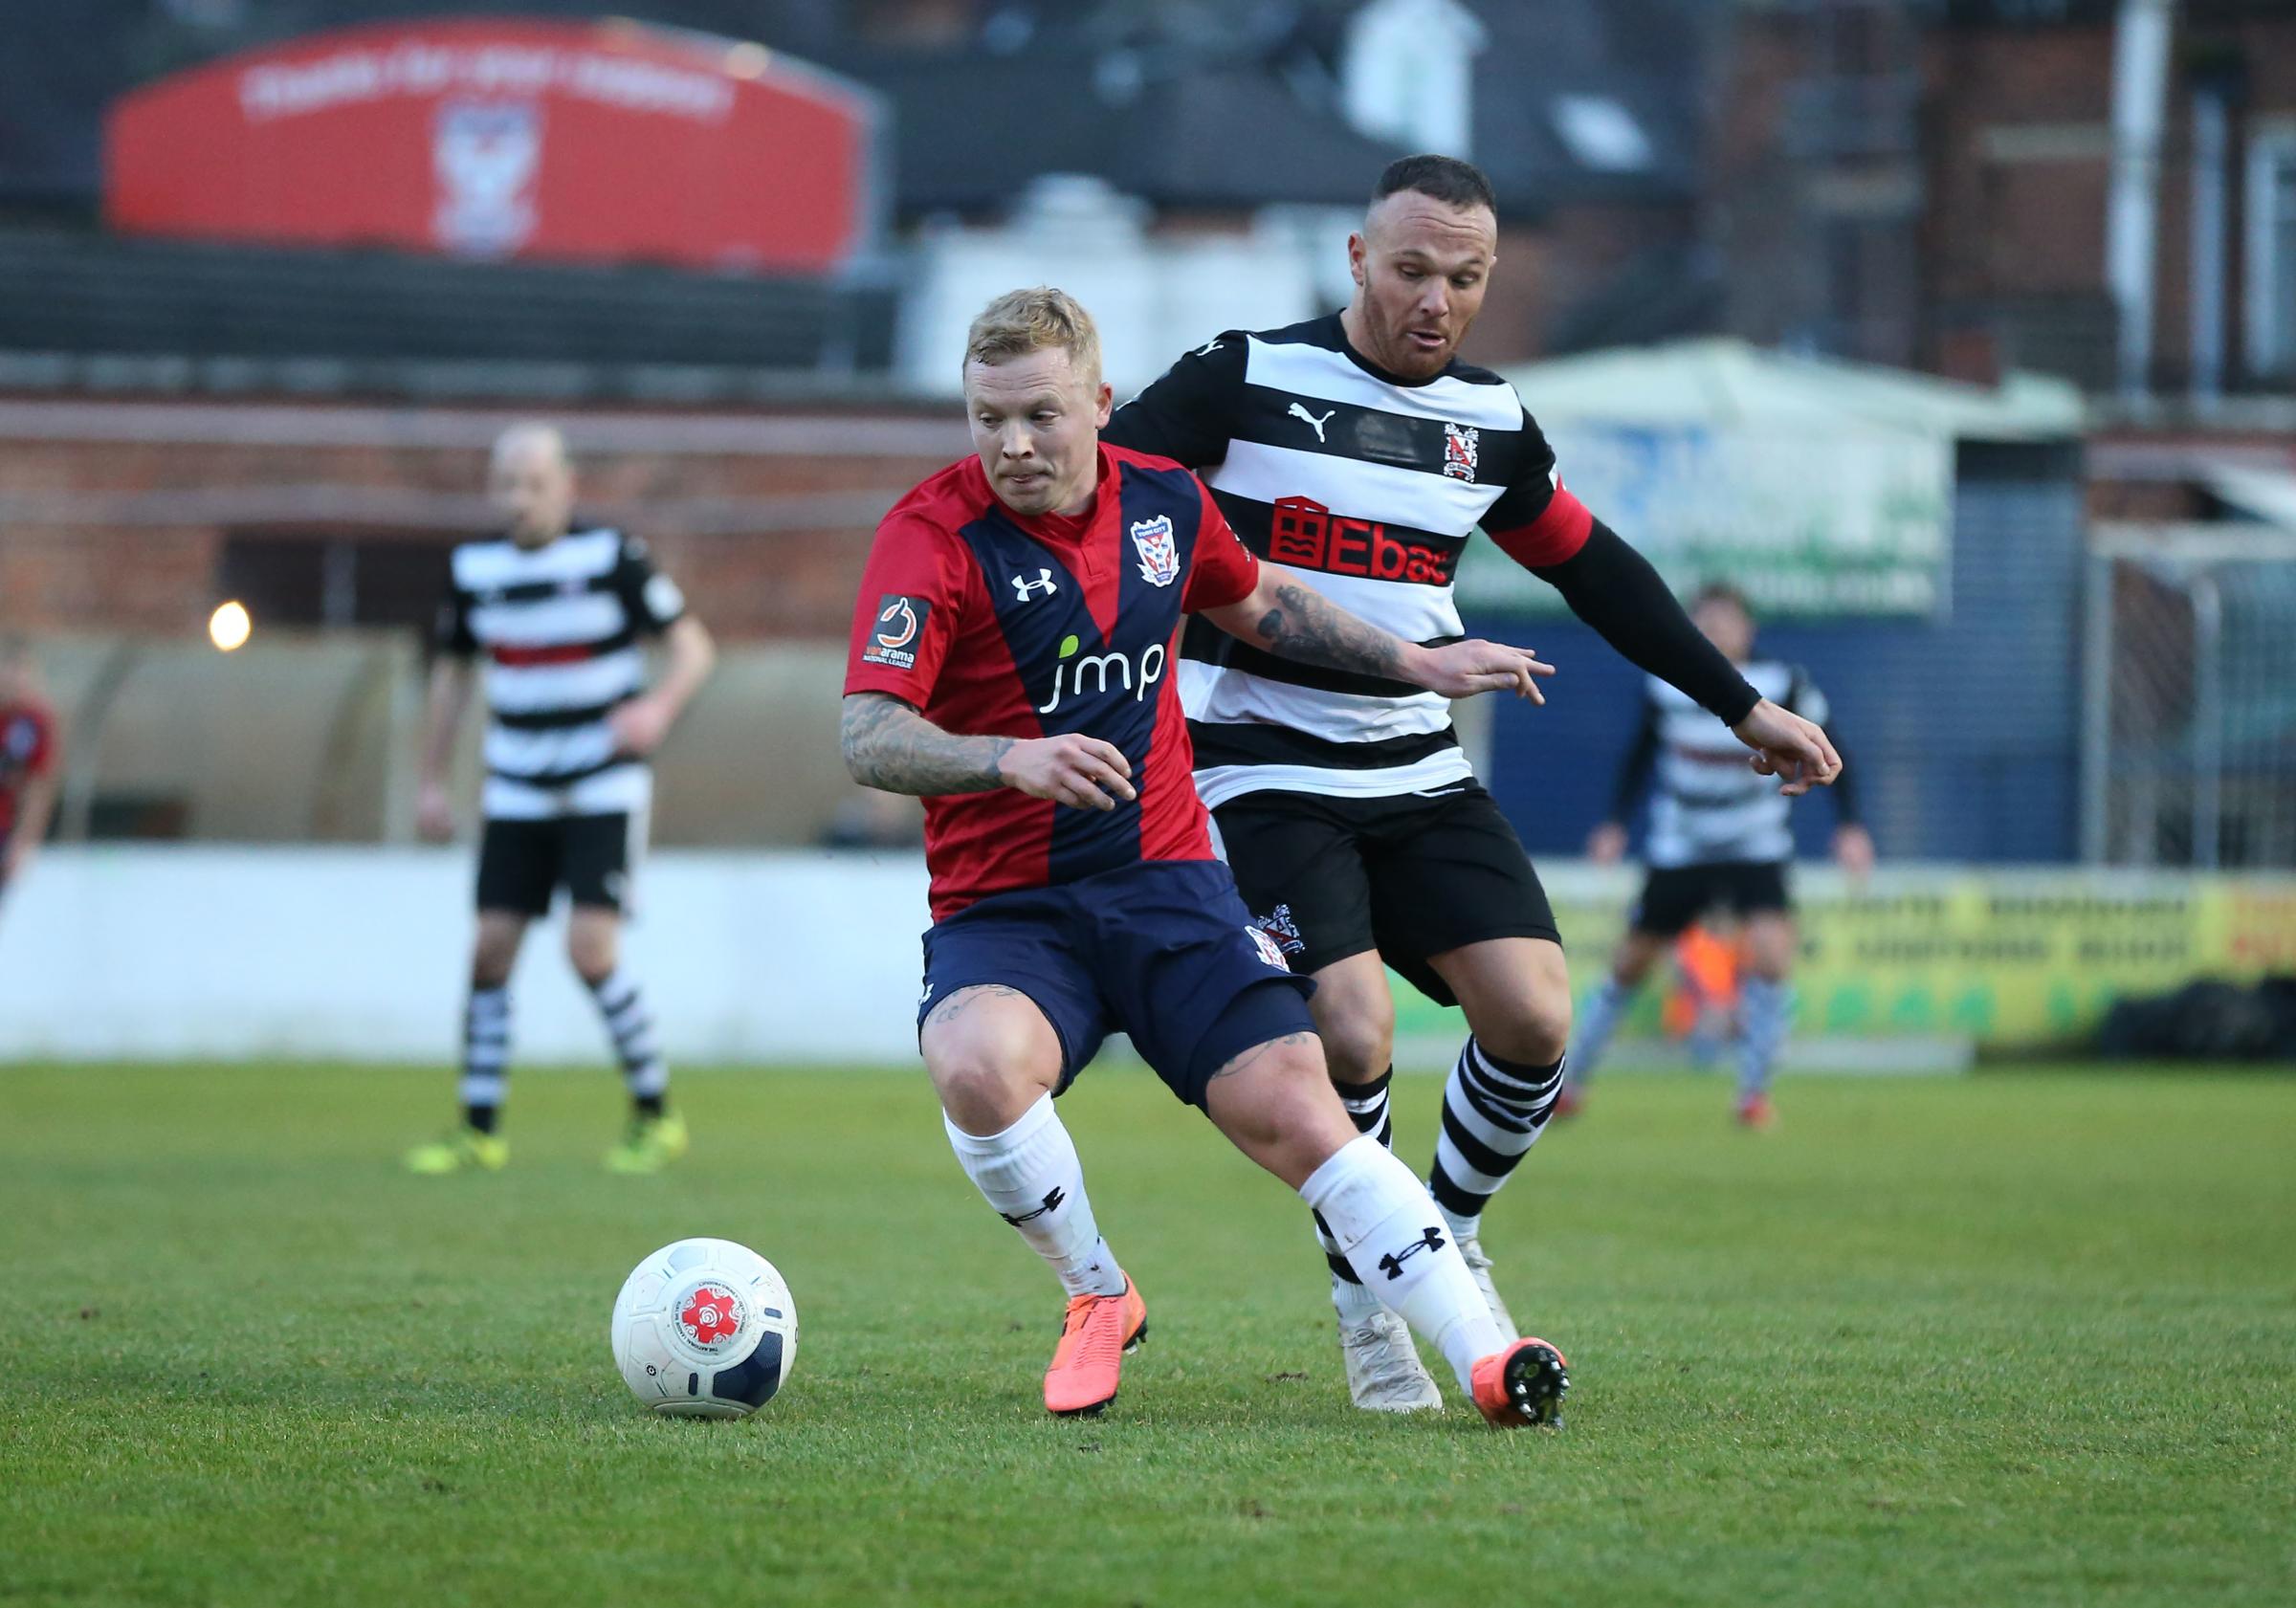 Talented Altrincham can be neutralised by a fast York City start ...